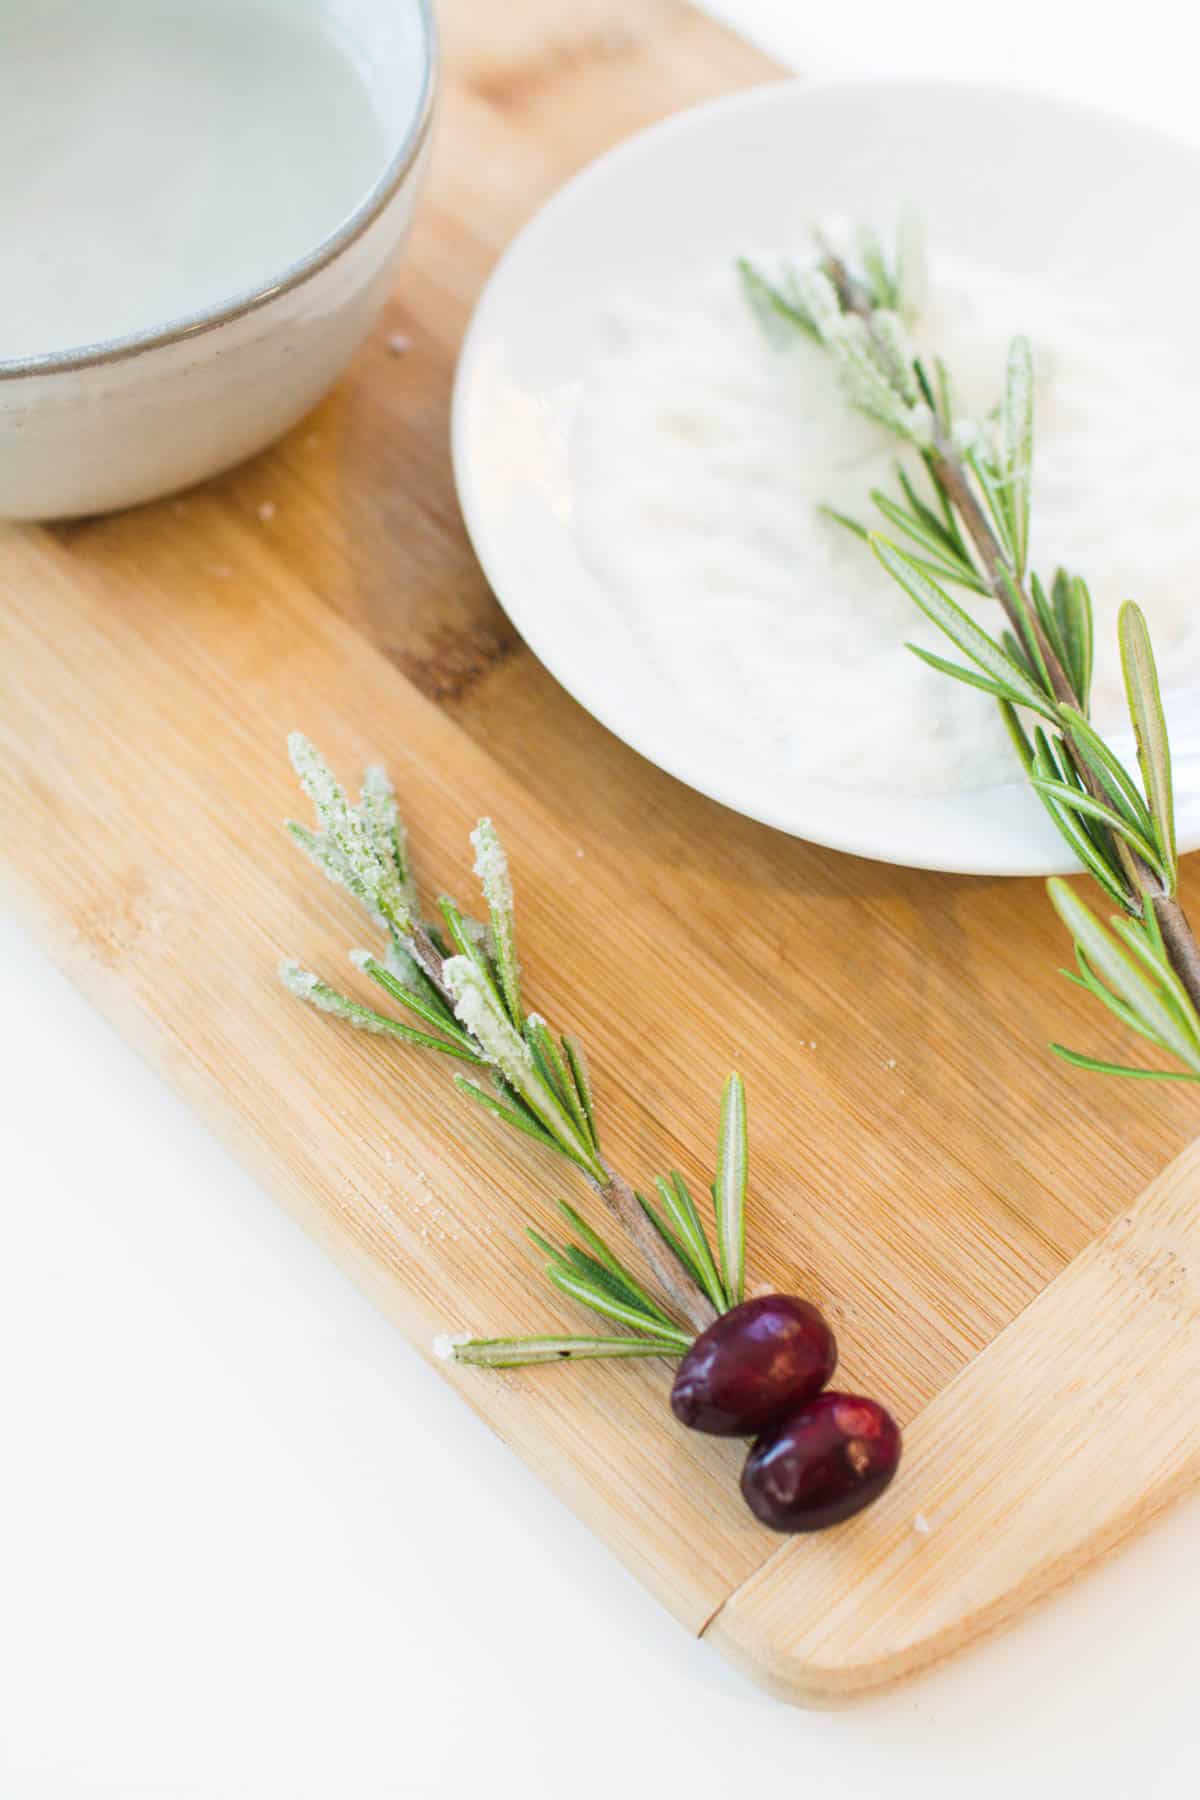 A sprig of sugared rosemary on a tray next to a plate of sugar with a sprig of rosemary.